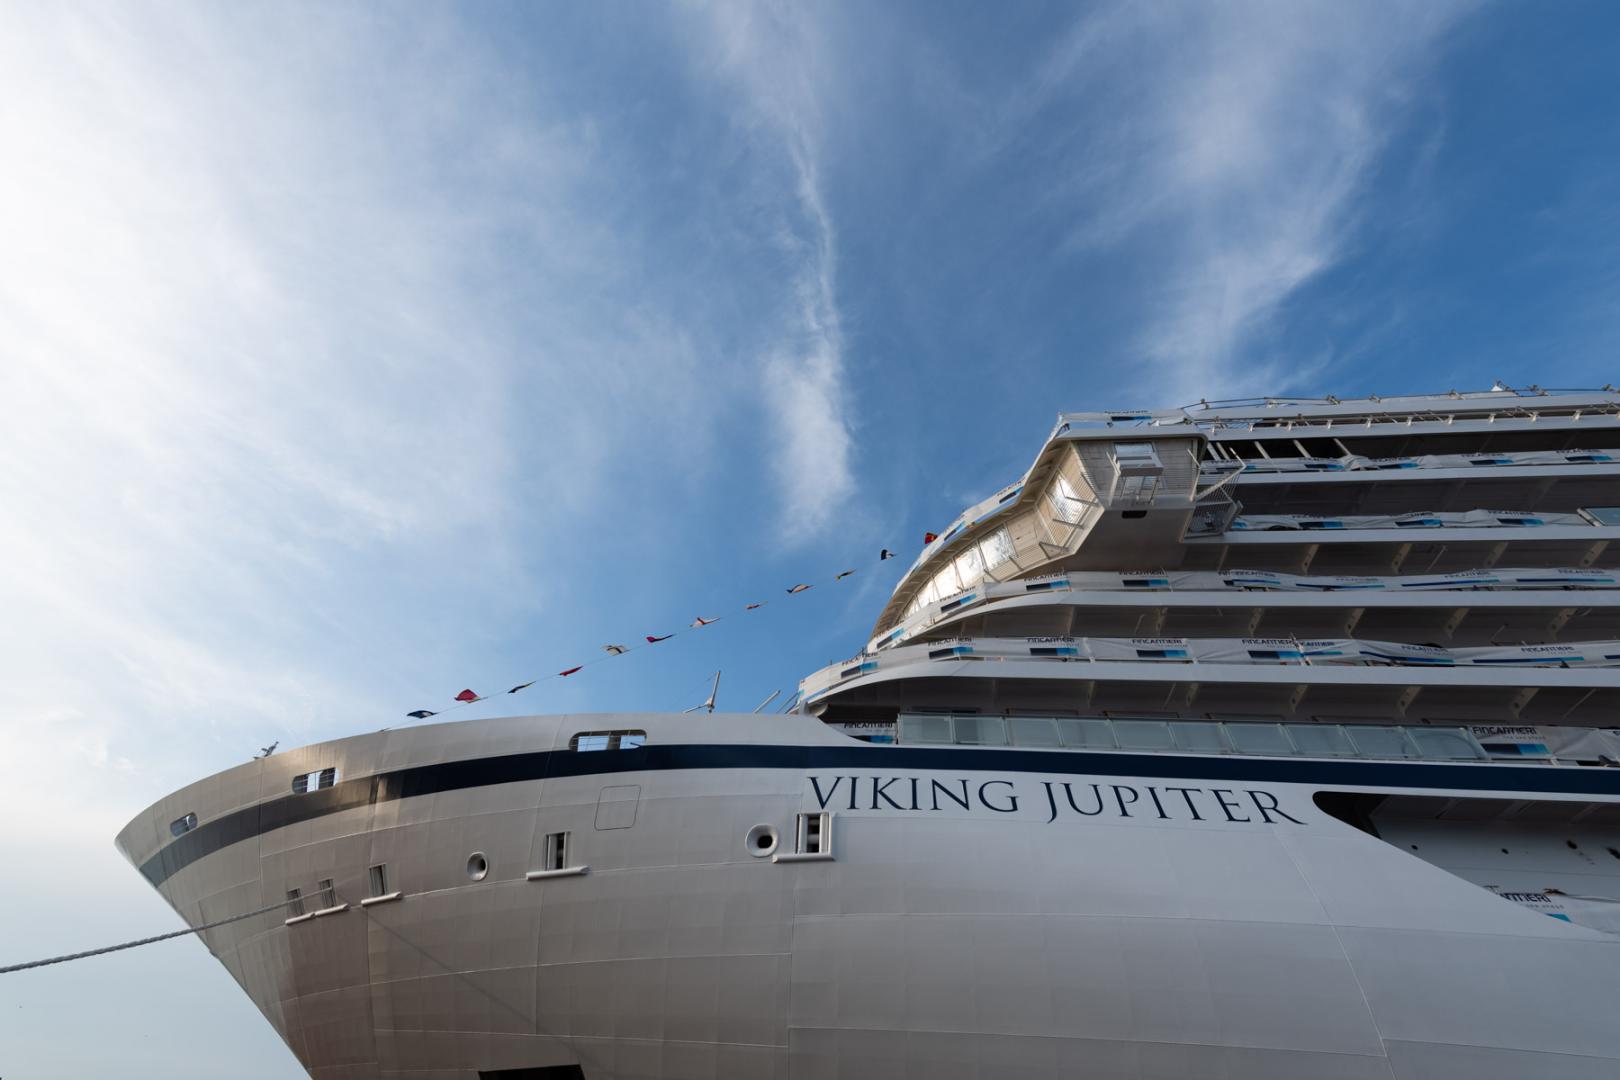 Fincantieri: “Viking Jupiter” floated out in Ancona